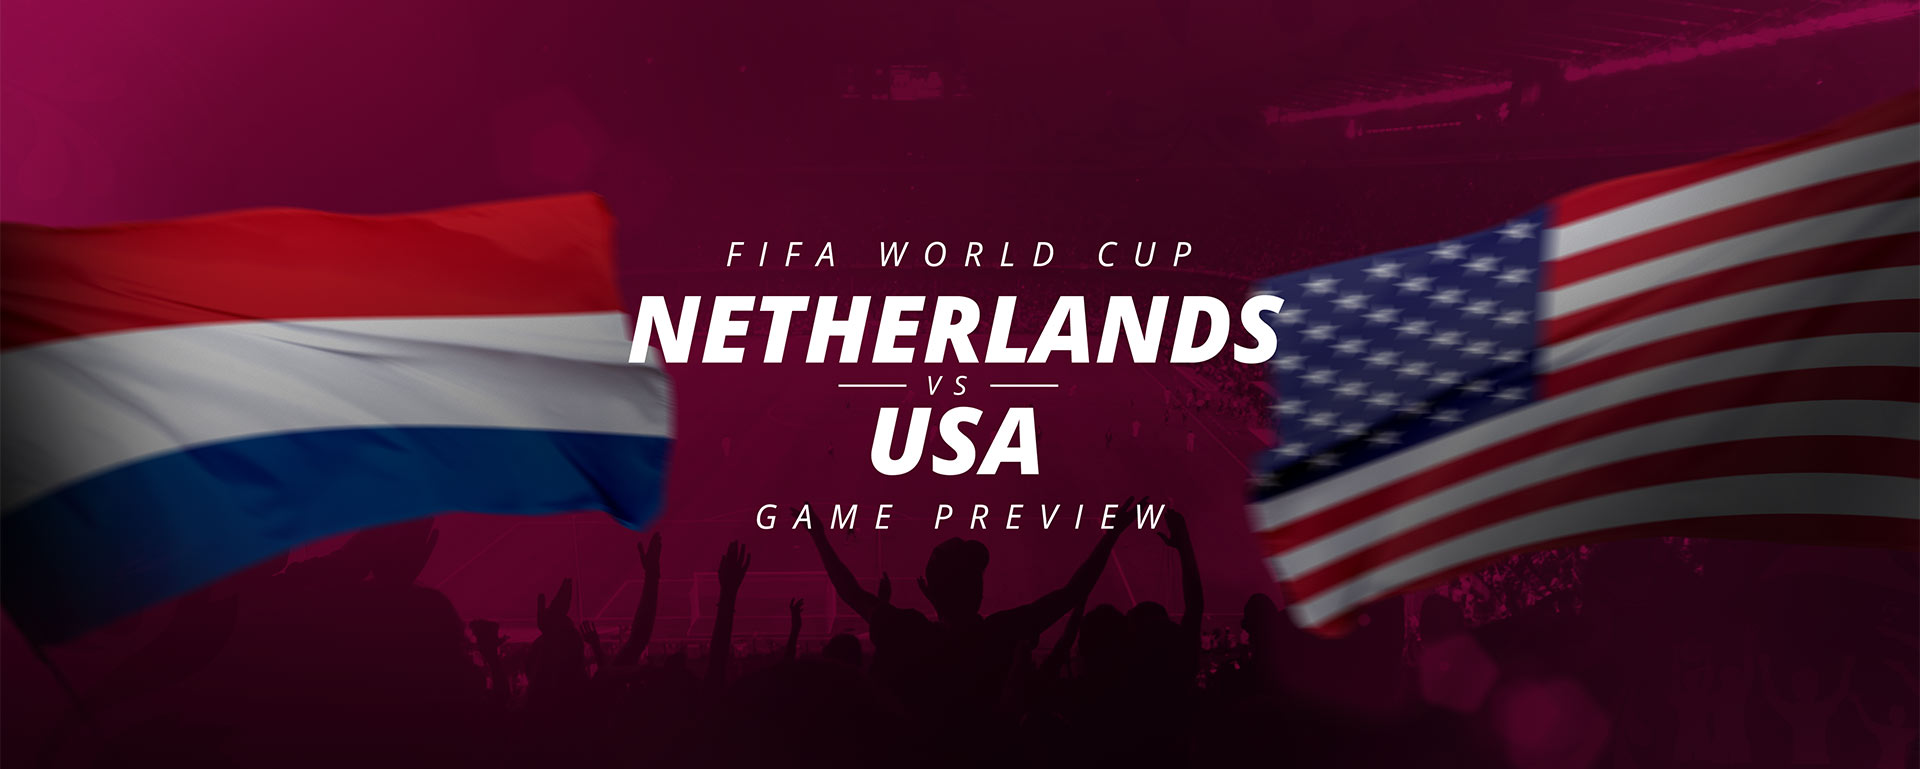 FIFA WORLD CUP: NETHERLANDS V USA – GAME PREVIEW